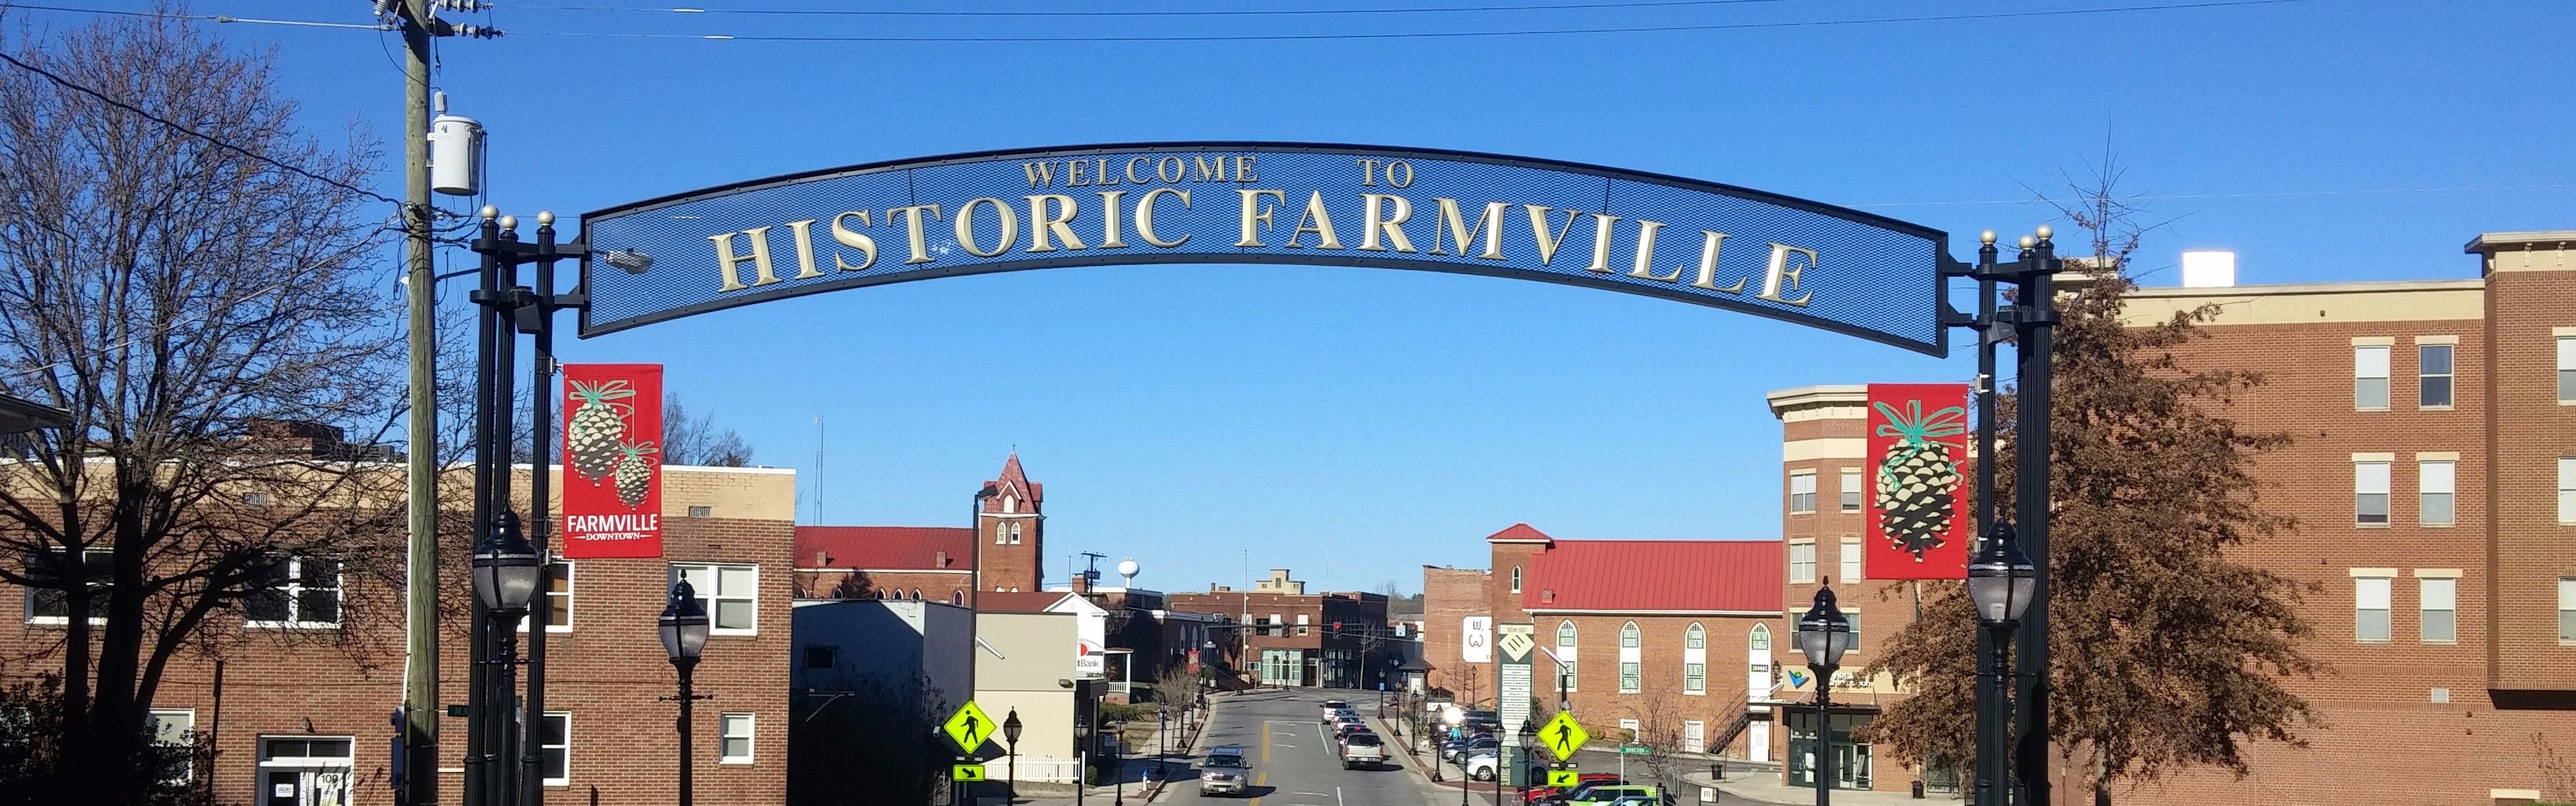 Welcome to Farmville sign